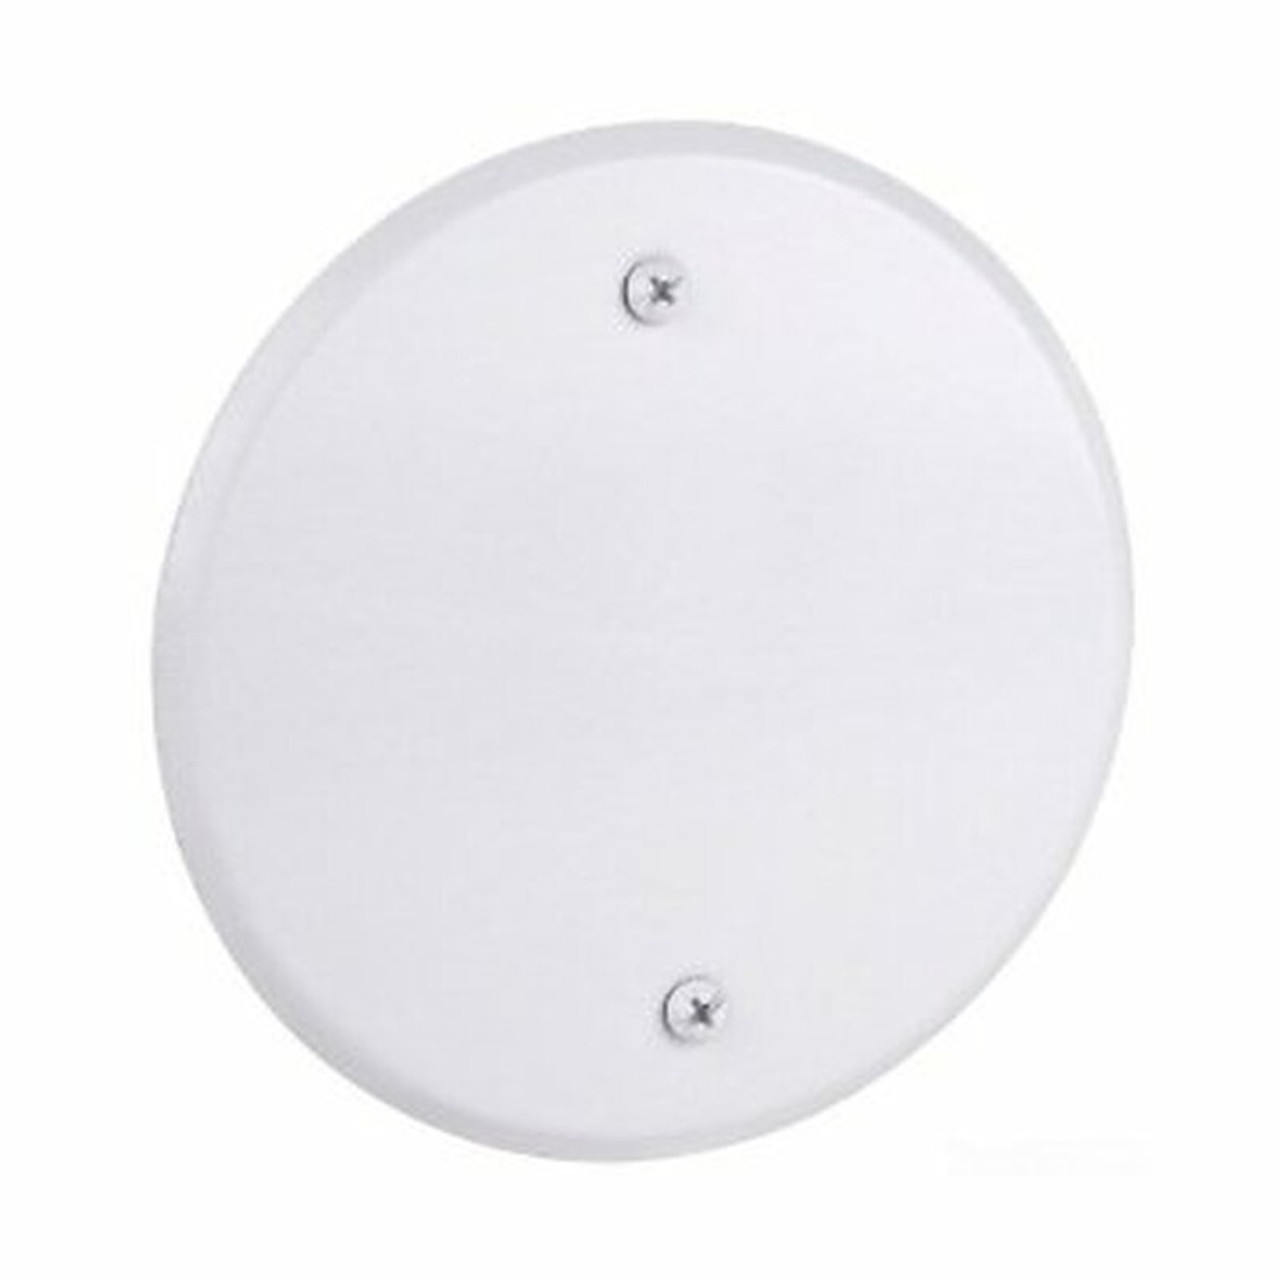 Mr. Munis - 5 Inch White Metal Ceiling Plate Cover - Cover Plate for 3 1/2  Round Hole or Octagon Box Cover Openings on Ceilings or Walls - Electrical